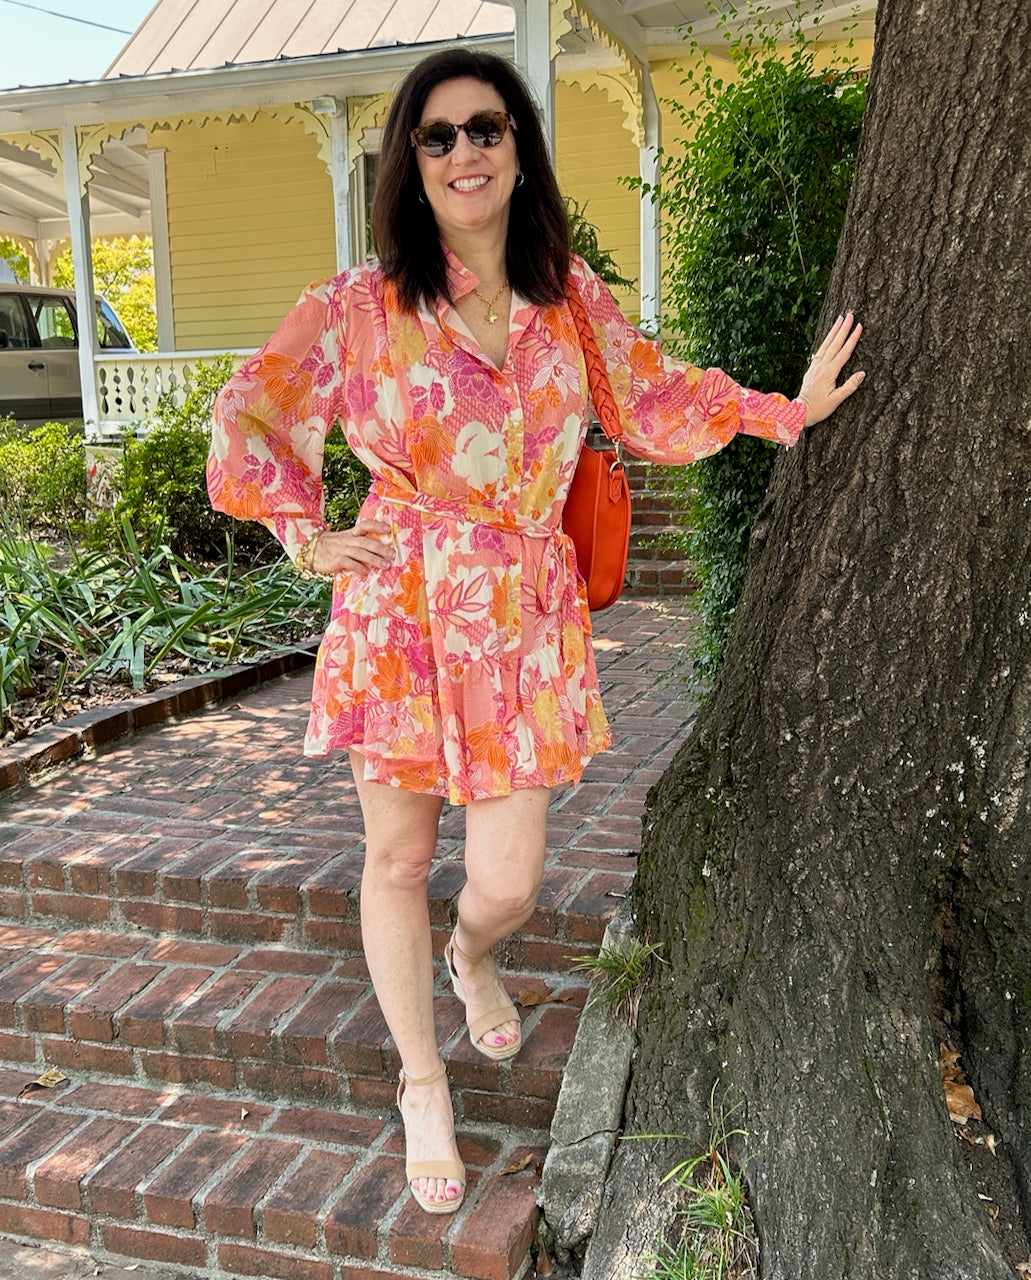 How pretty is this Floral Print Button Front Dress?! We love the color, the fabric, the flirty skirt and the great fit! Though long sleeved, the airy fabric keeps you cooler while covering your arms. It is a beautiful floral print in shades of magenta, orange, yellow, and cream. The button-up front ends at a mock neck offering the opportunity to wear the neck oped, as Tara is, or buttoned closed. The dress is lined and perfect for all occasions. It's certain to brighten you day! 